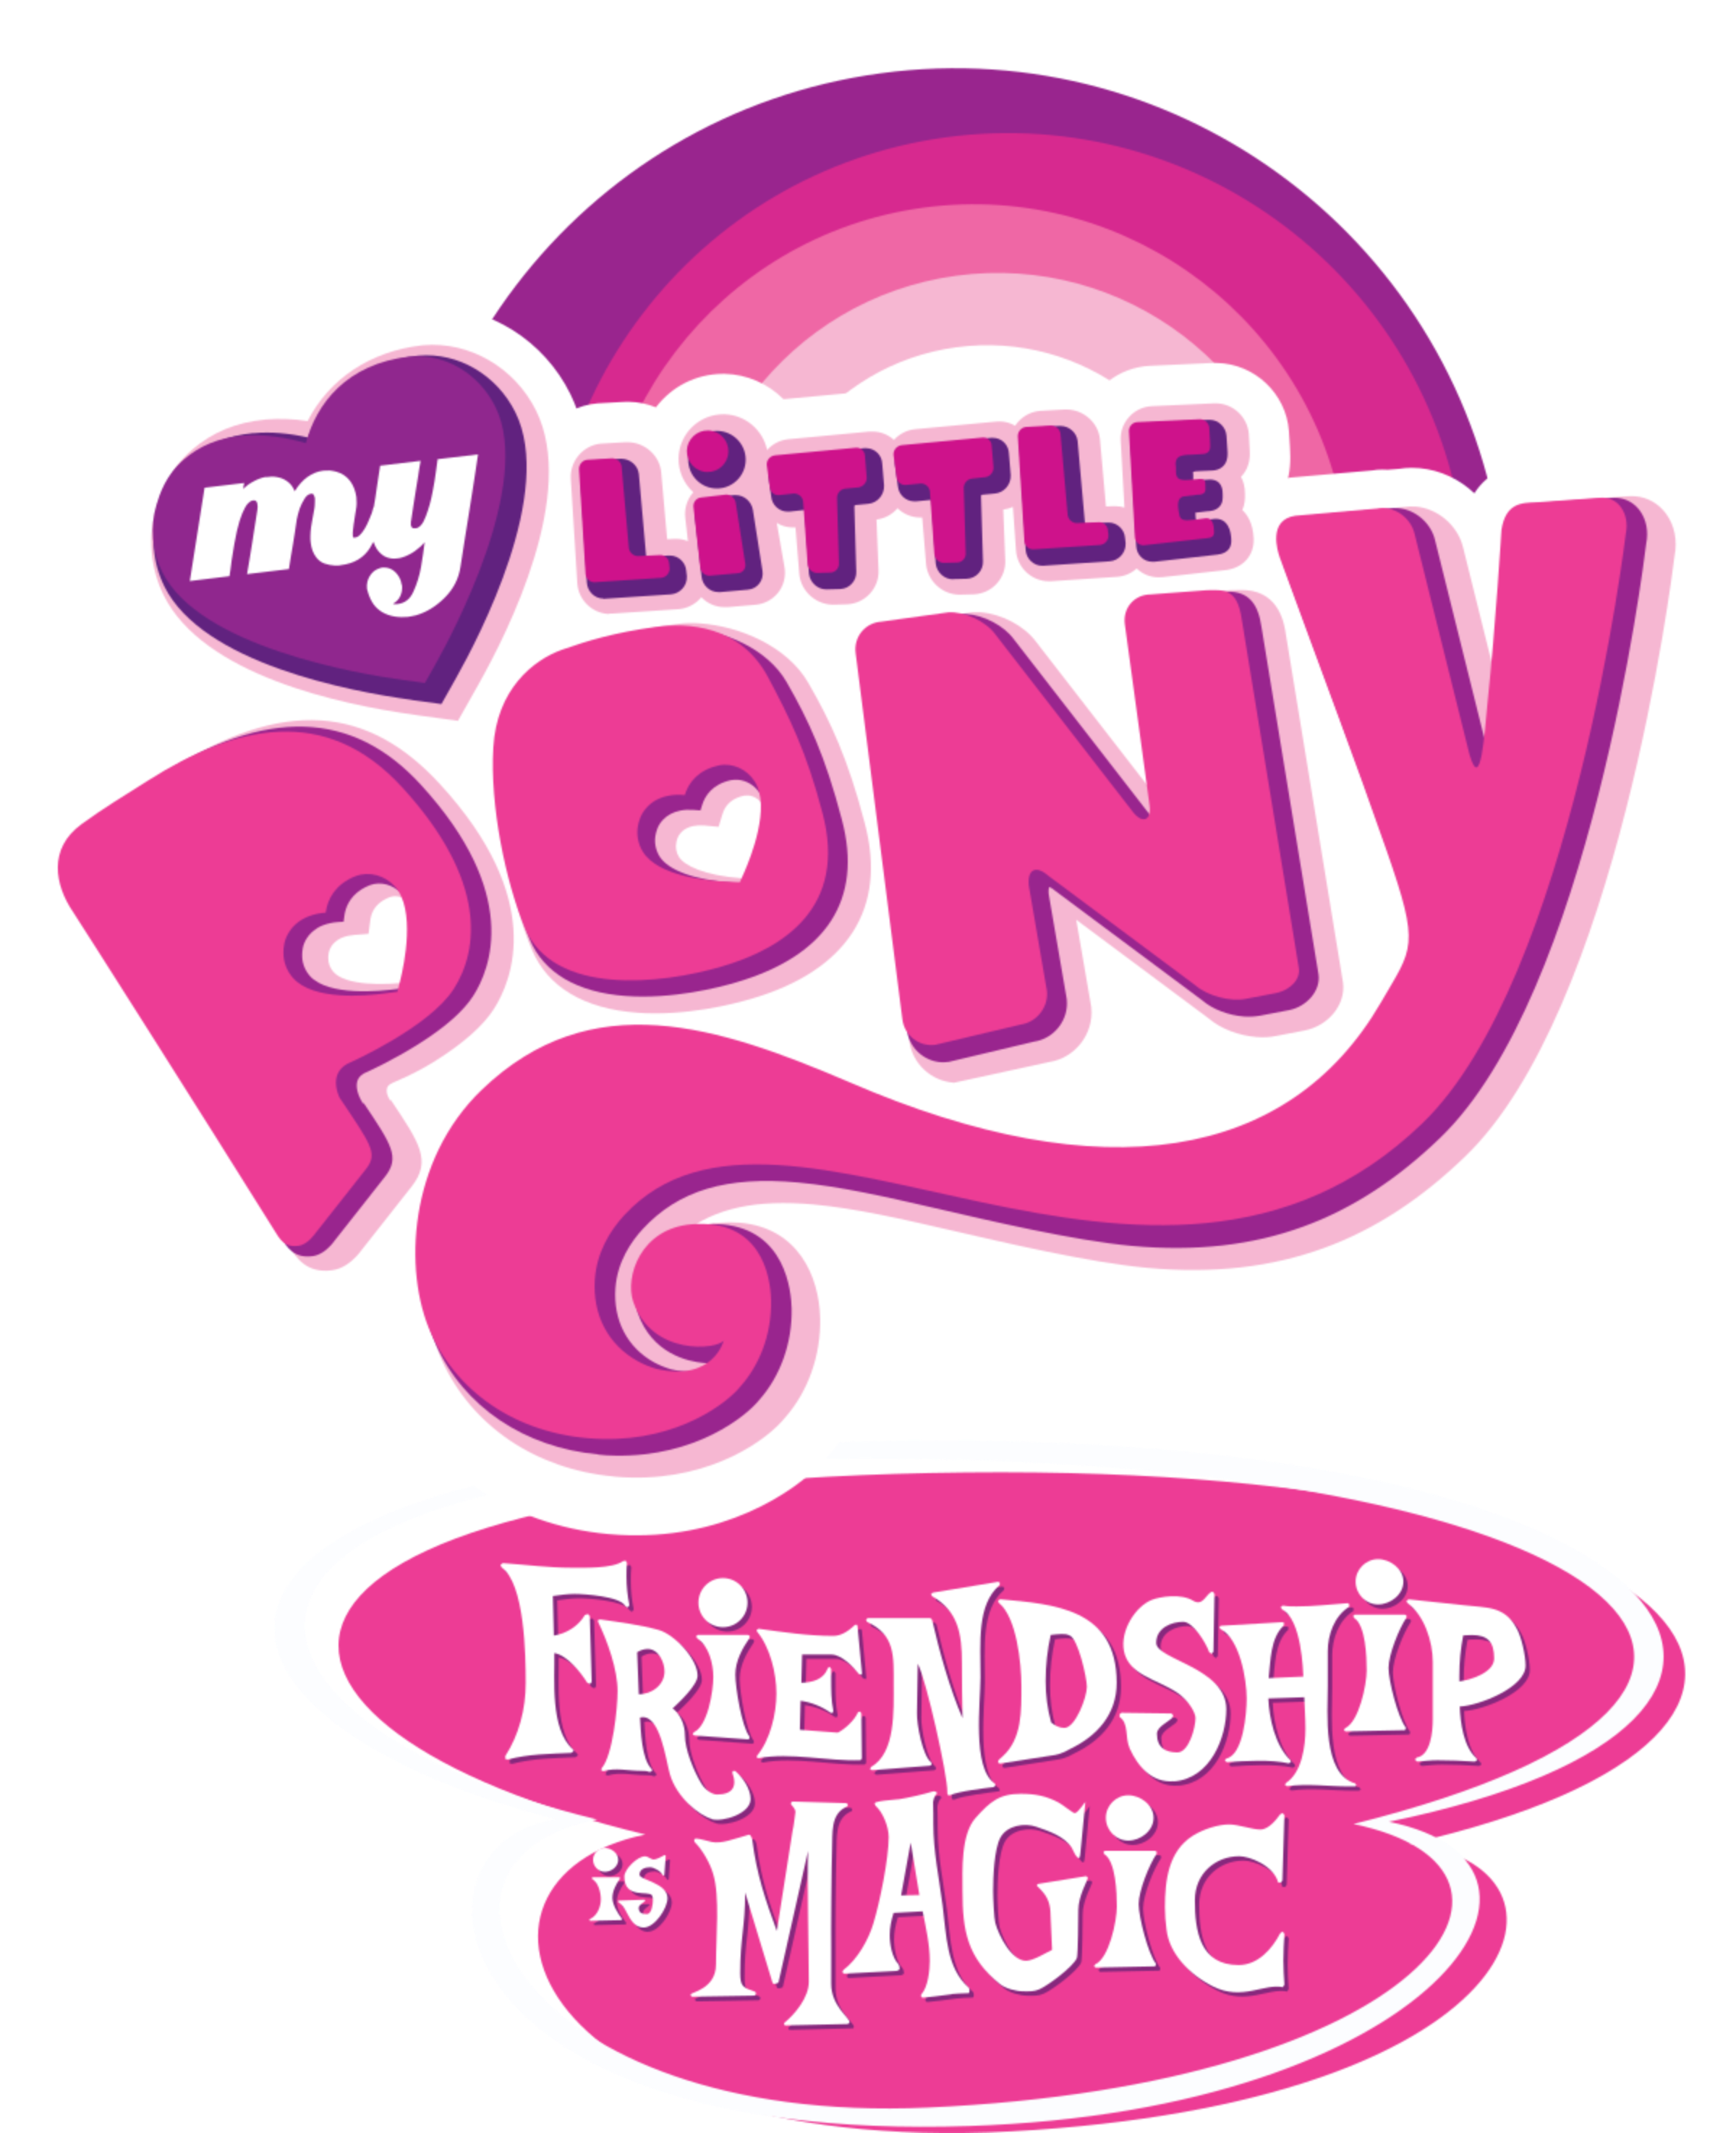 My Little Pony: Friendship Is Magic Complete 